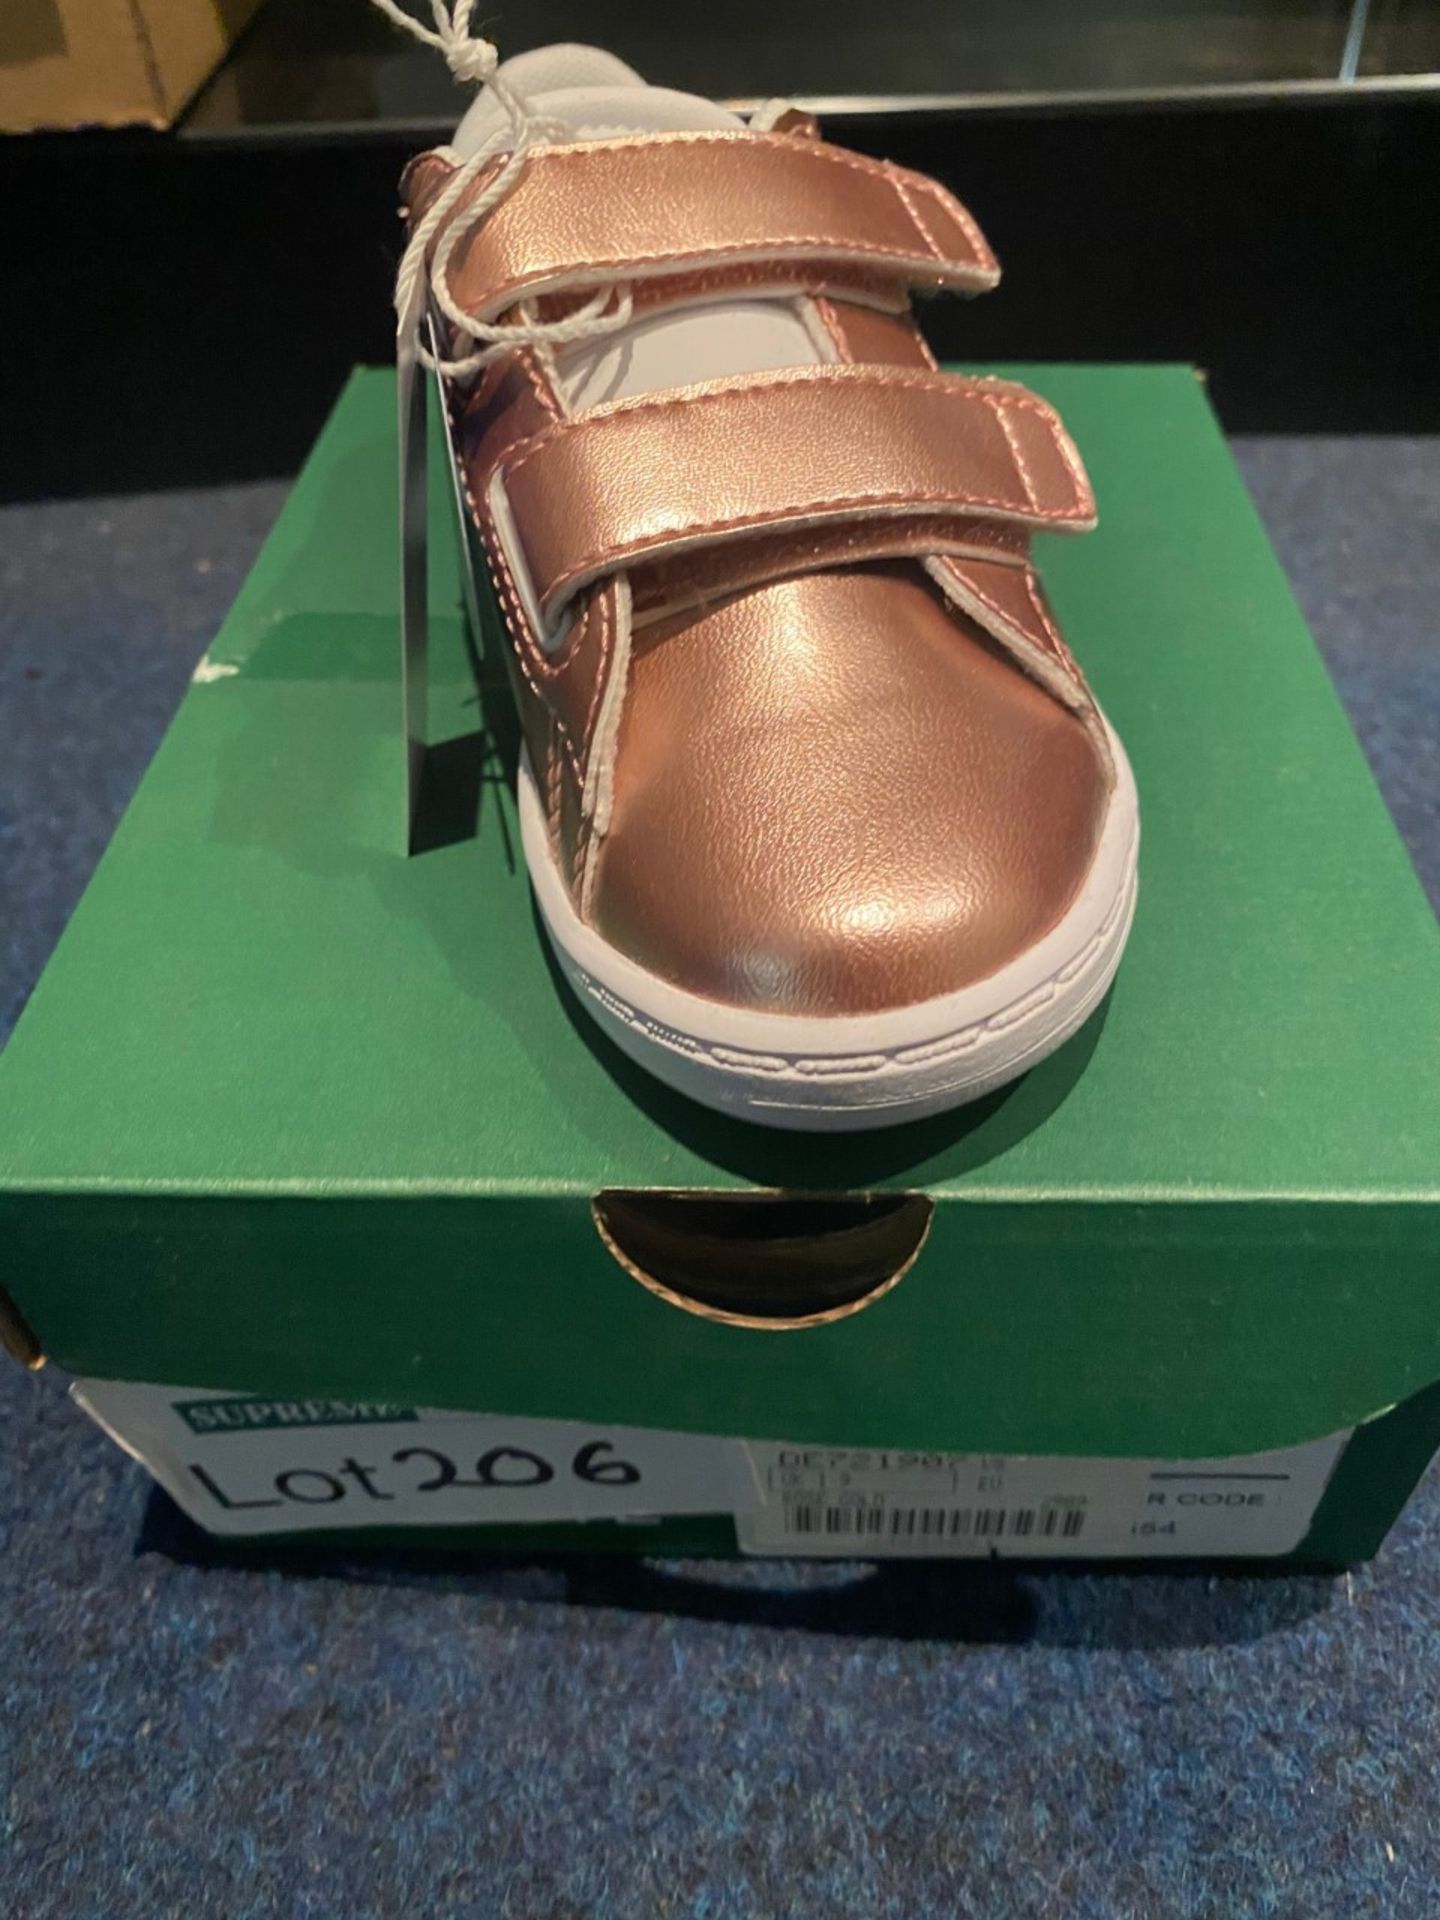 NEW & BOXED LACOSTE ROSE GOLD TRAINERS SIZE INFANT 9 - Image 2 of 3